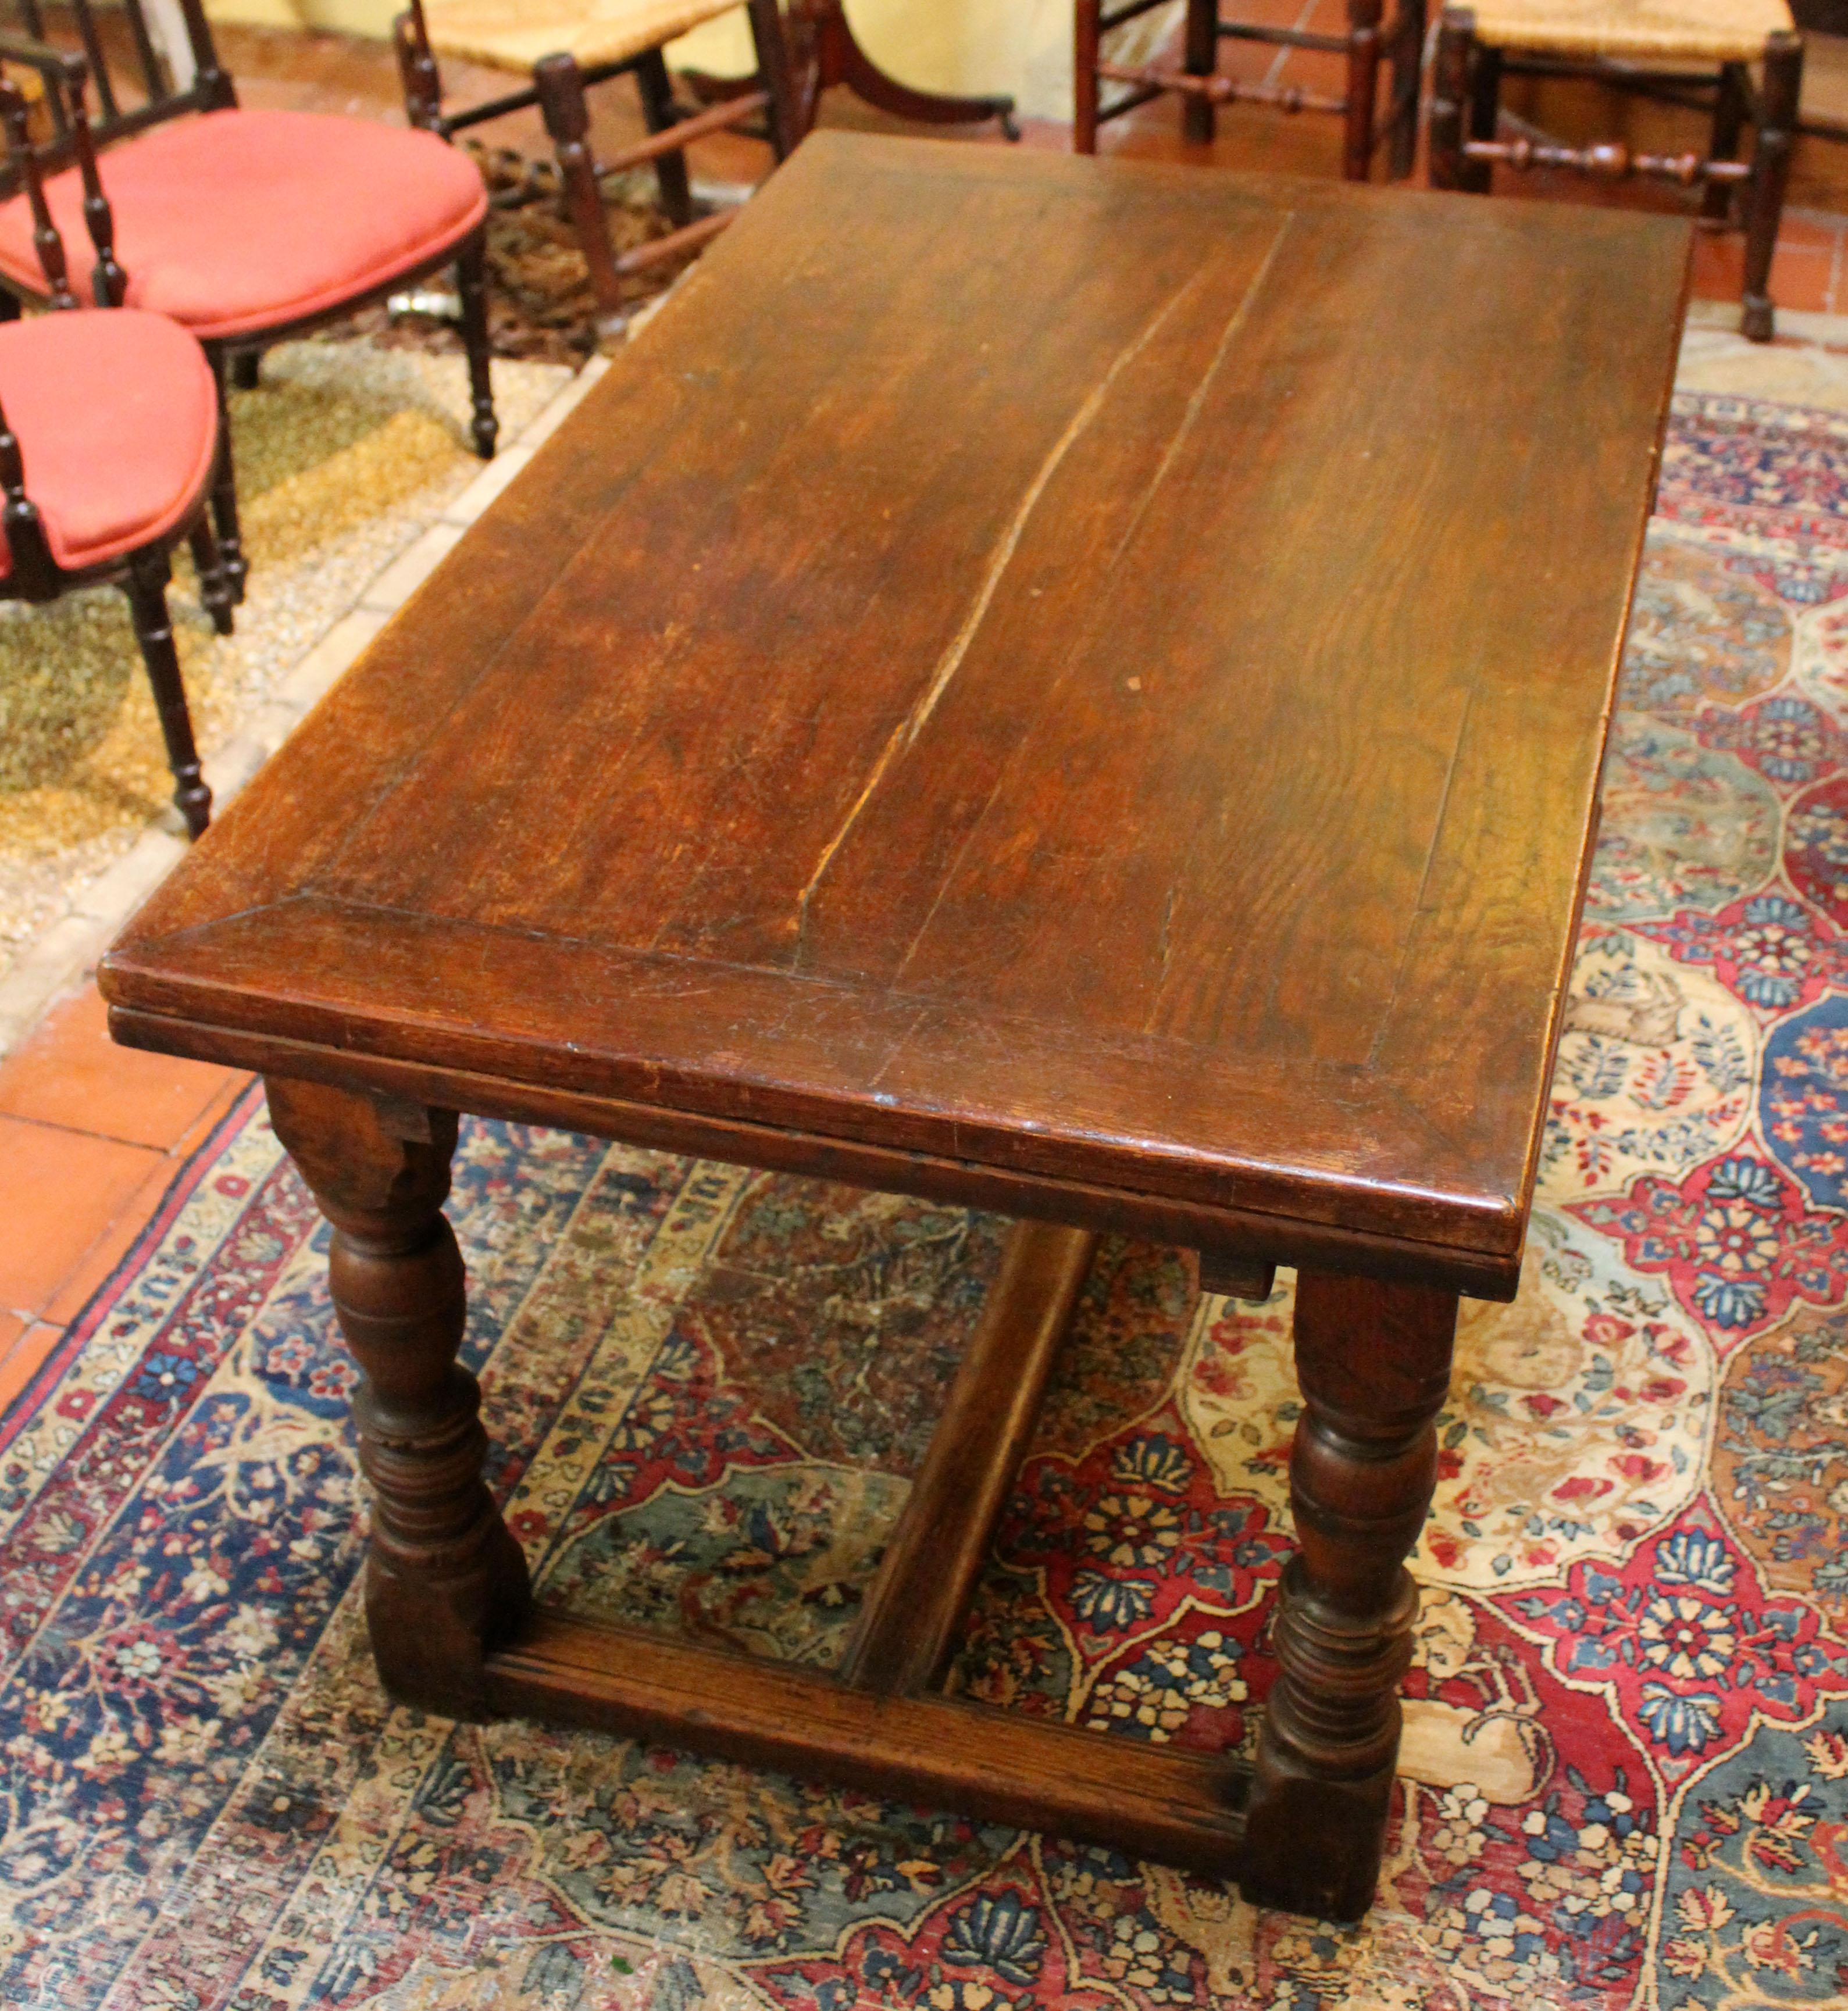 19th Century Circa 1860 Jacobean Revival Style Draw Leaf Table For Sale